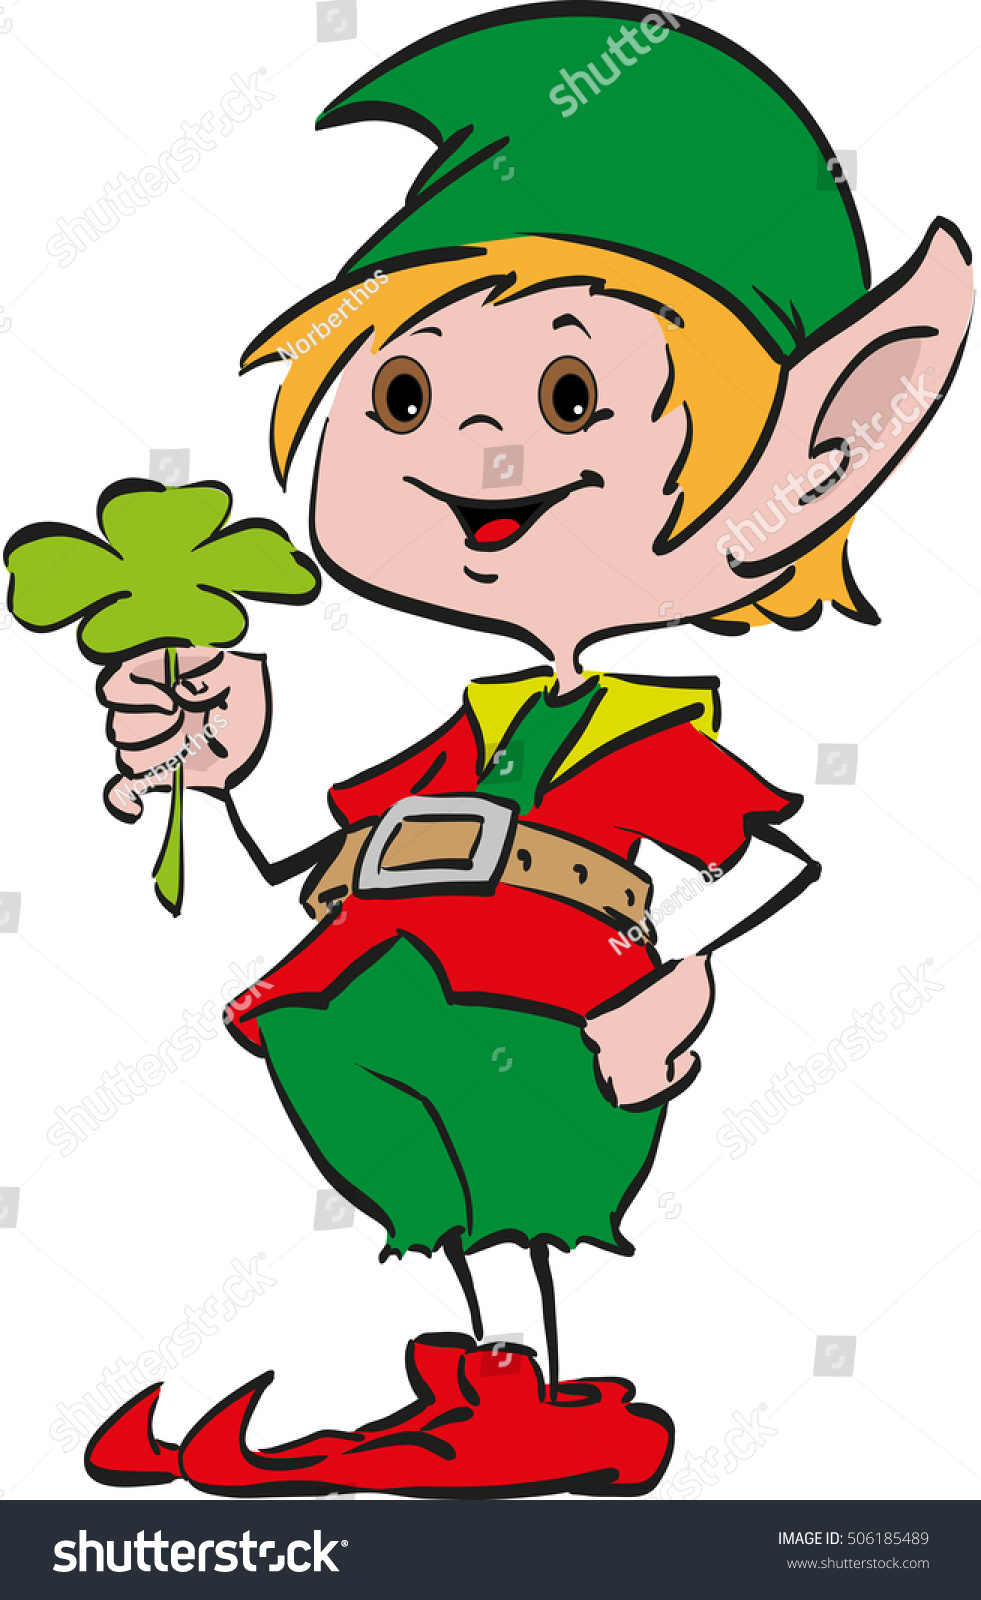 stock-vector-happy-smiling-boy-christmas-santa-s-elf-holding-a-four-leaf-clover-in-his-hand-506185489